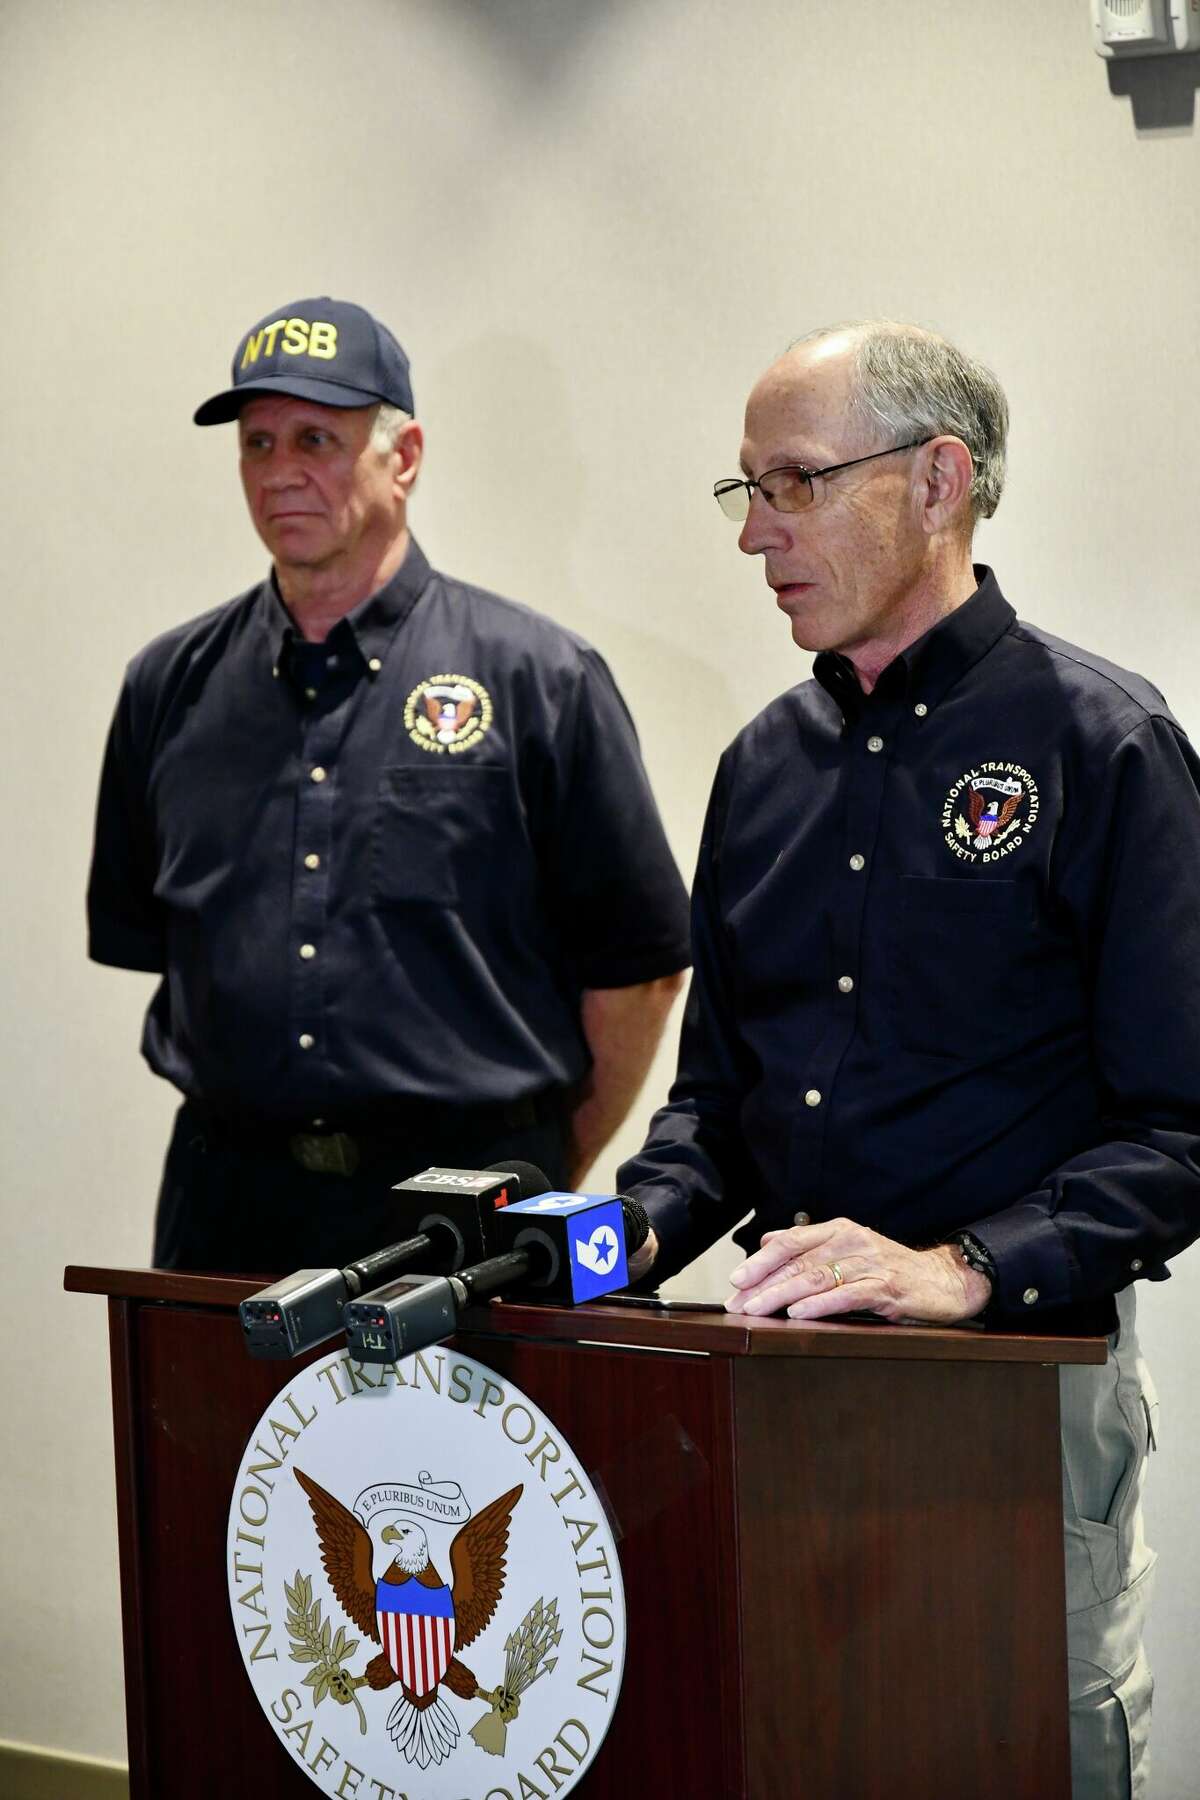 National Transportation Safety Board Vice Chairman Bruce Landsberg, right, and Investigator Robert Acetta answer questions from the media Thursday, March 17, 2022, in Odessa, Texas. NTSB is investigating the March 15, 2022, fatal crash that killed nine people in Andrews, Texas. 